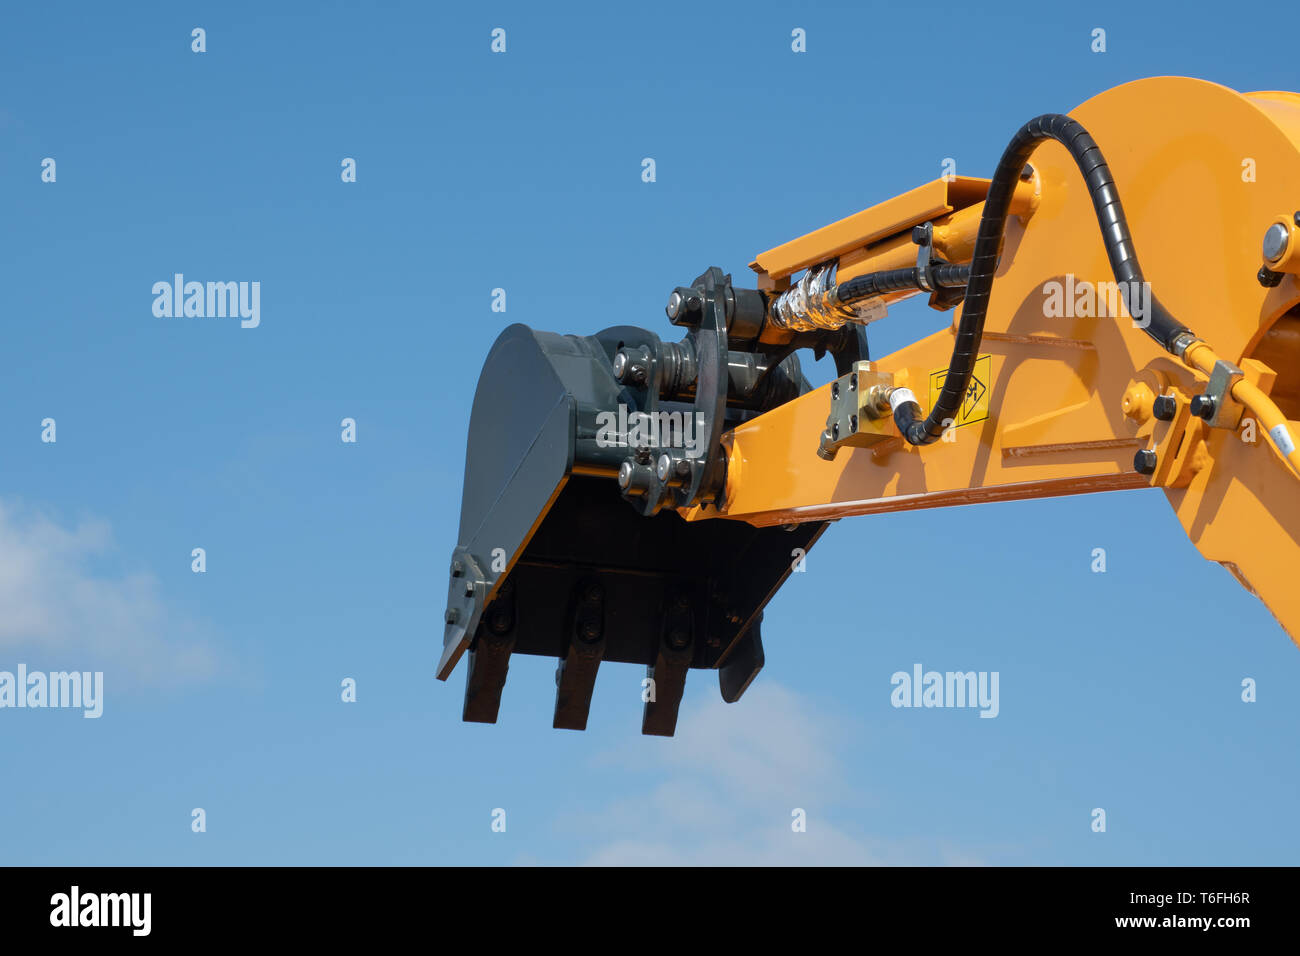 Arm of earth excavating equipment with blue sky Stock Photo